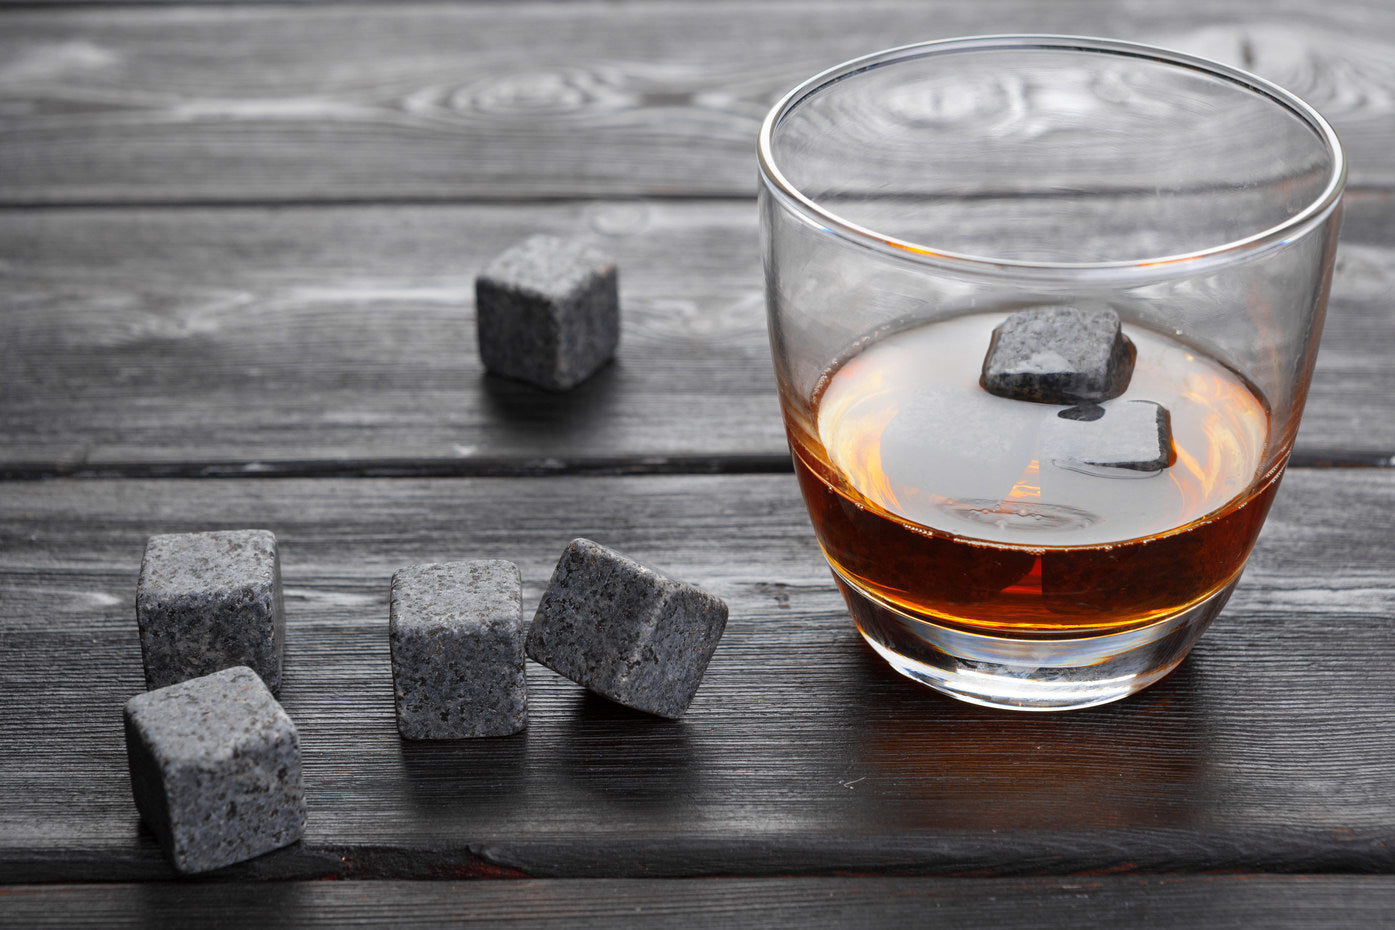 Whisky Stones in a glass of whisky